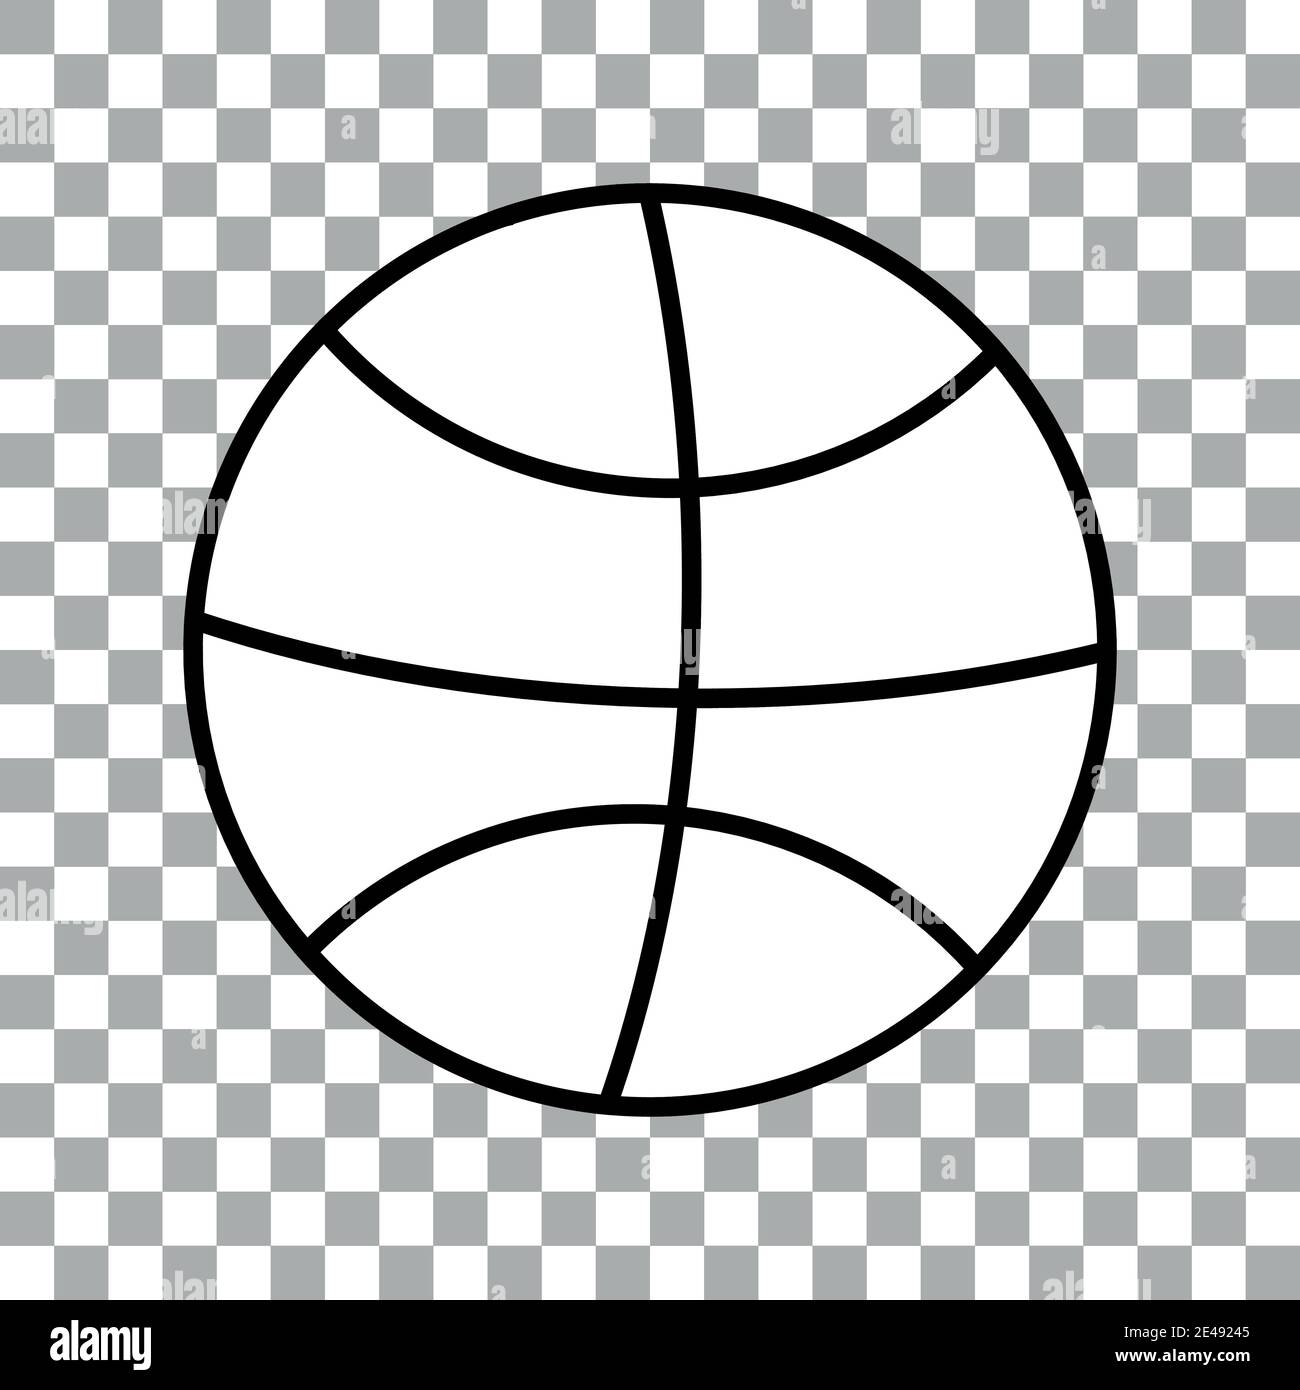 Basketball ball icon isolated black and white lines Stock Vector